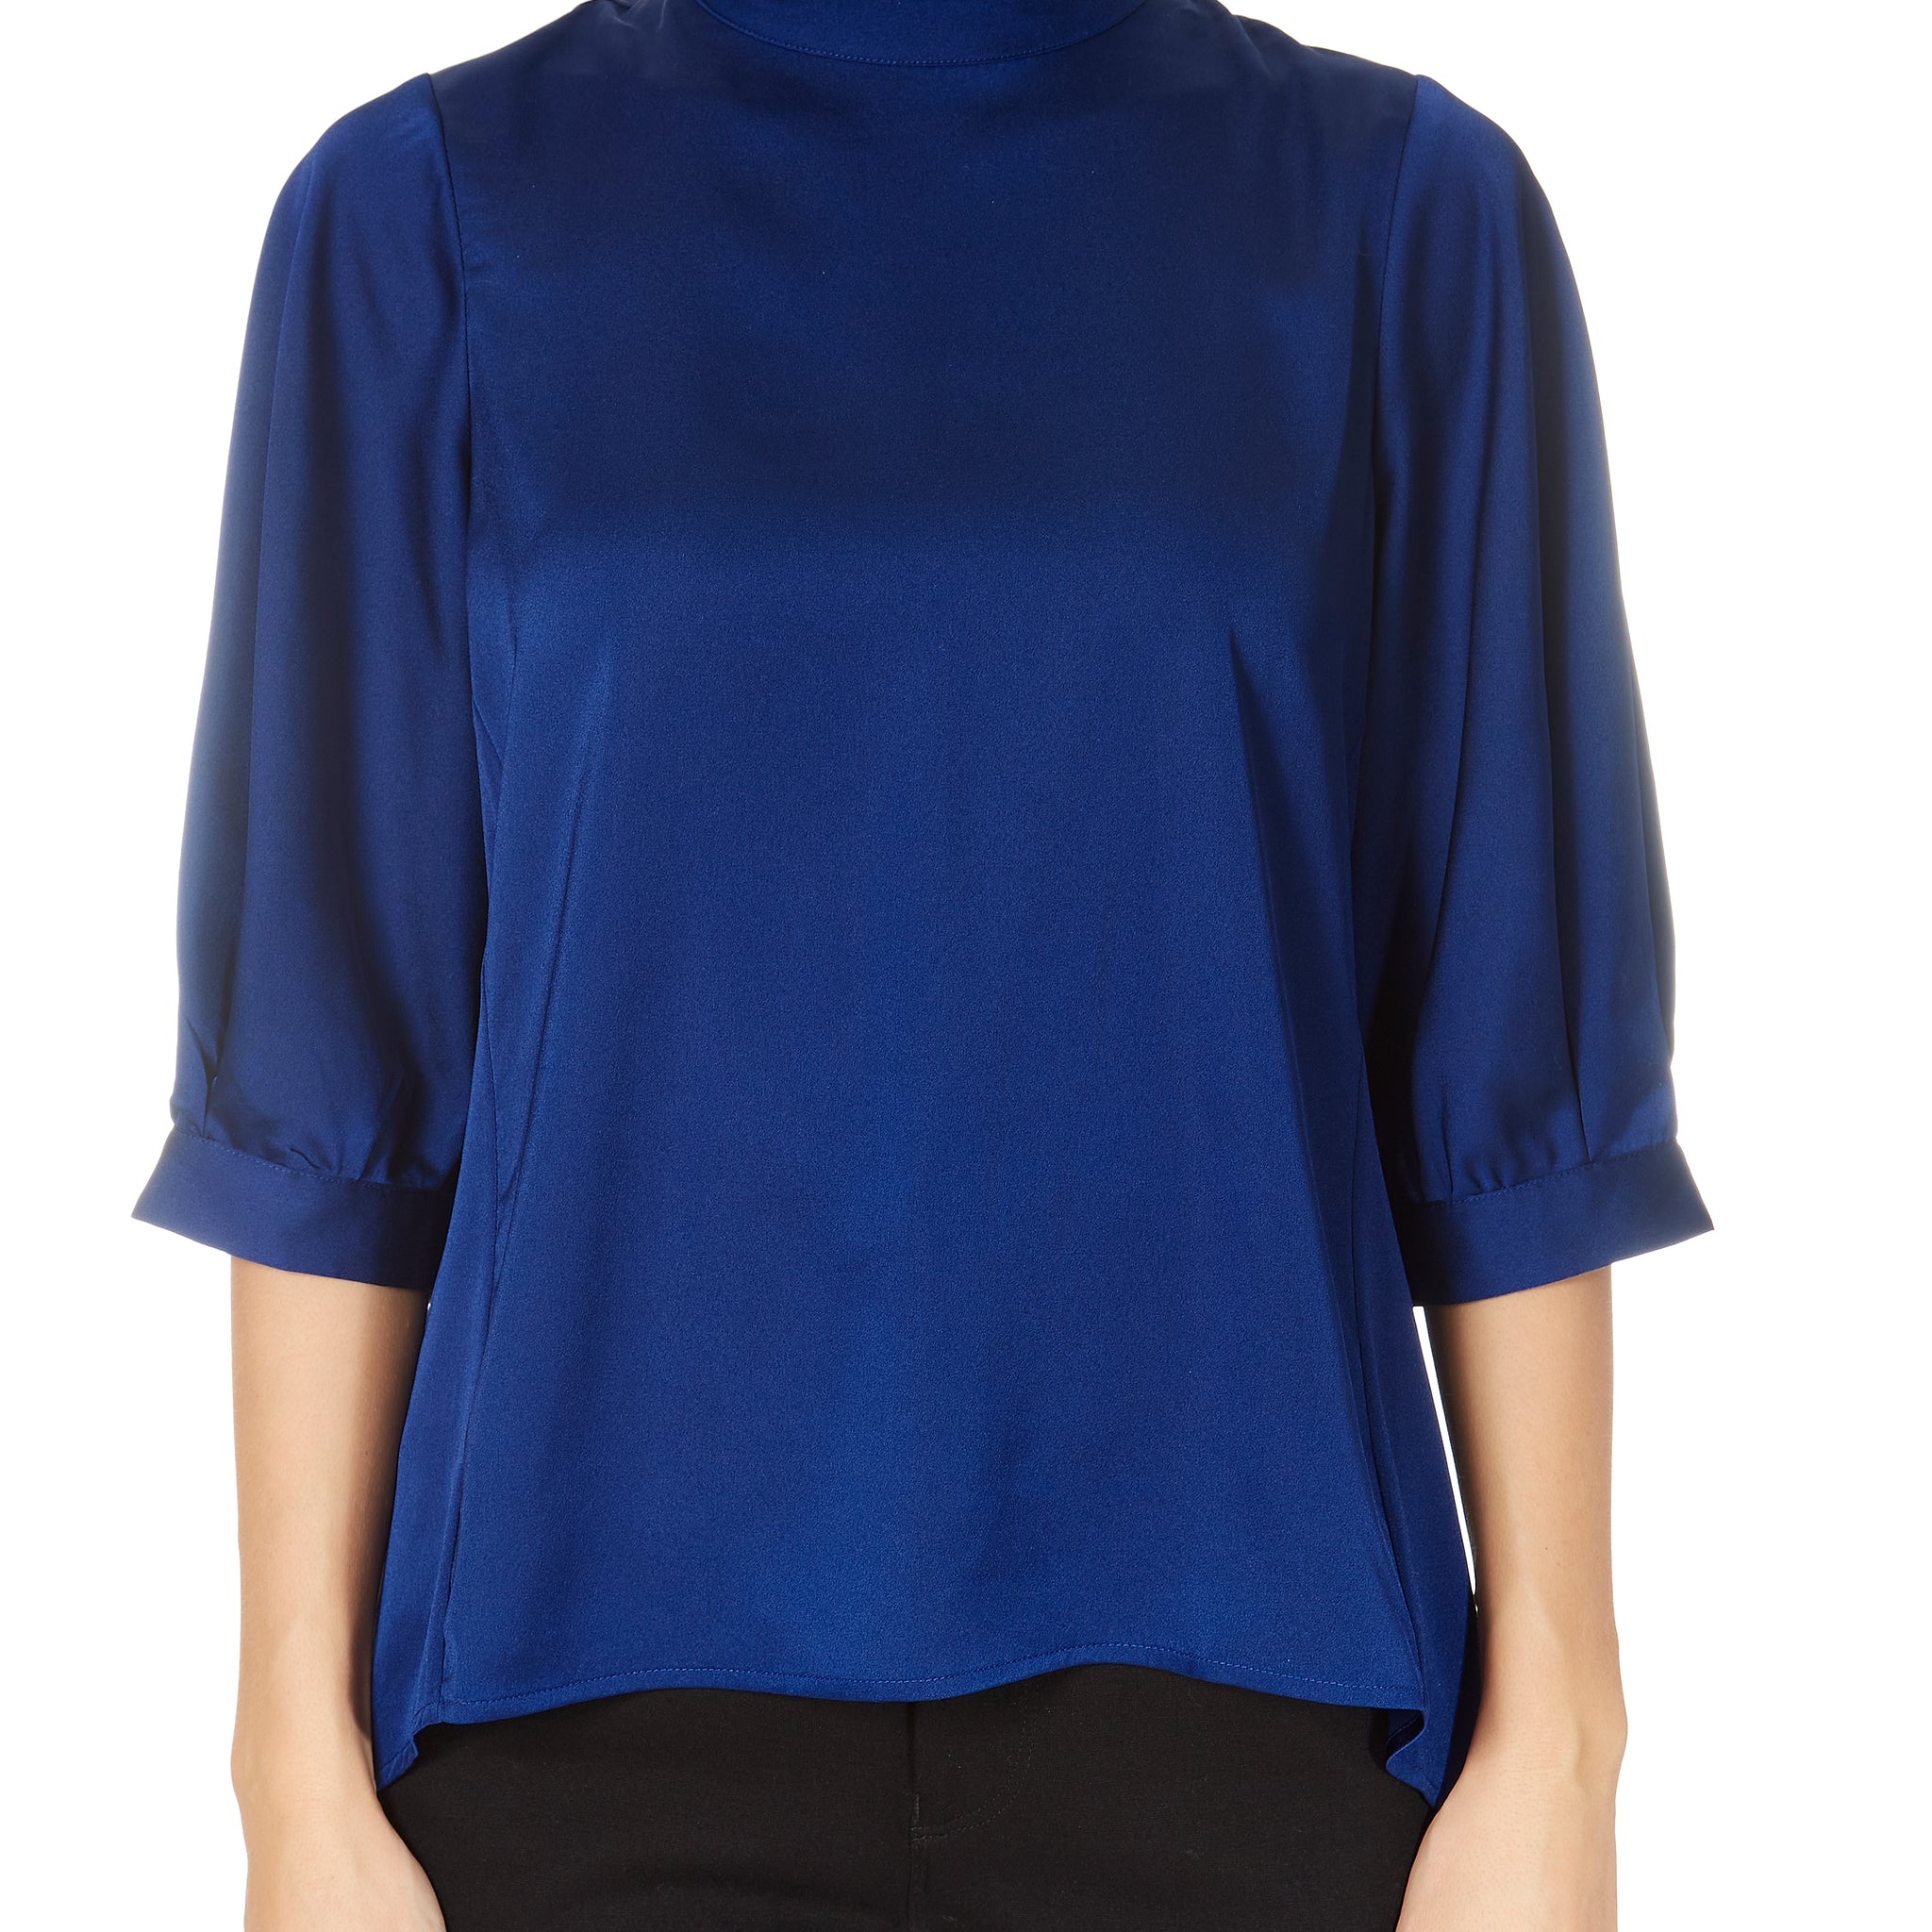 'Meet Up' Blue High Neck Top With Sleeves - Jessimara